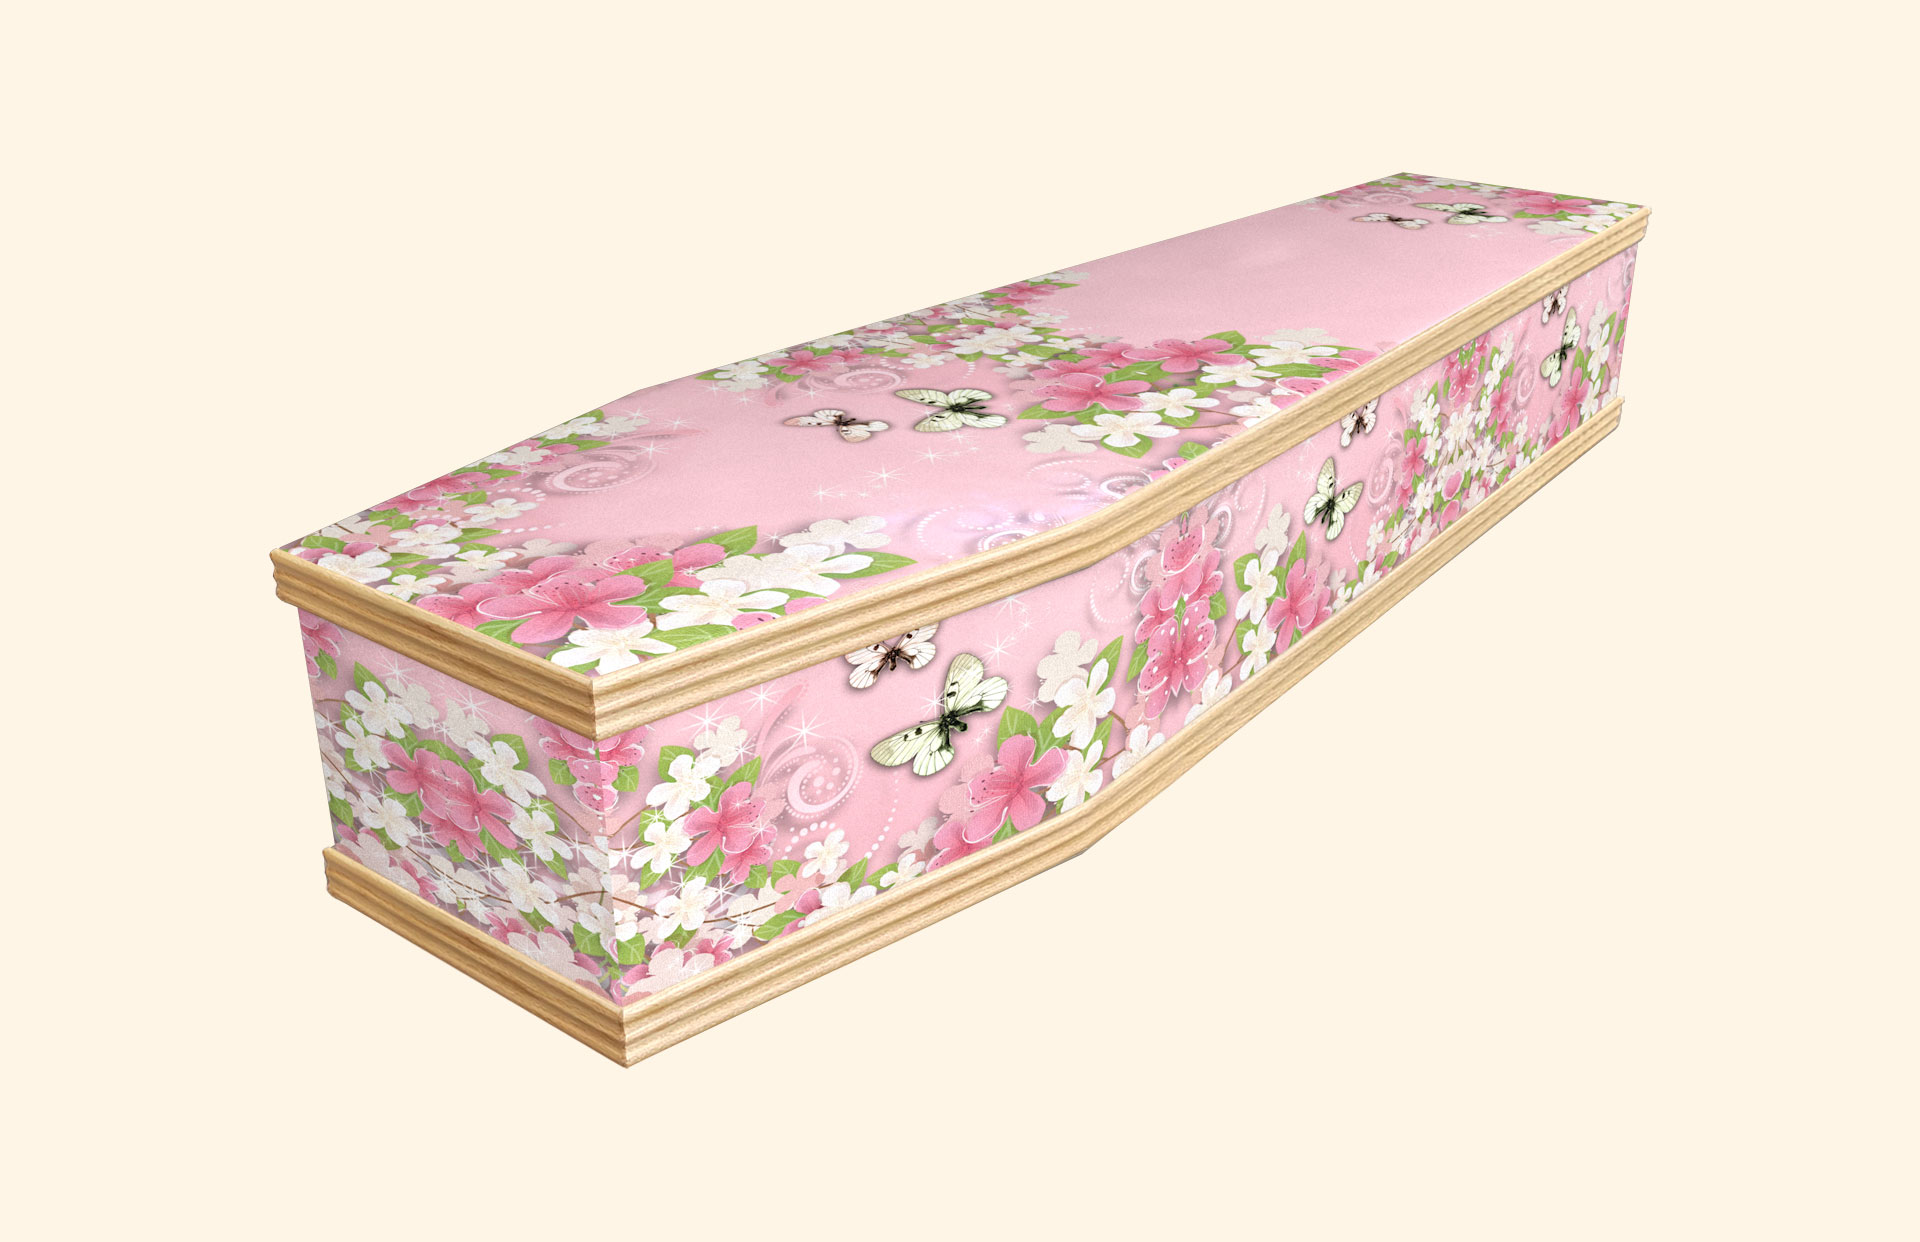 Patsy design on a classic coffin